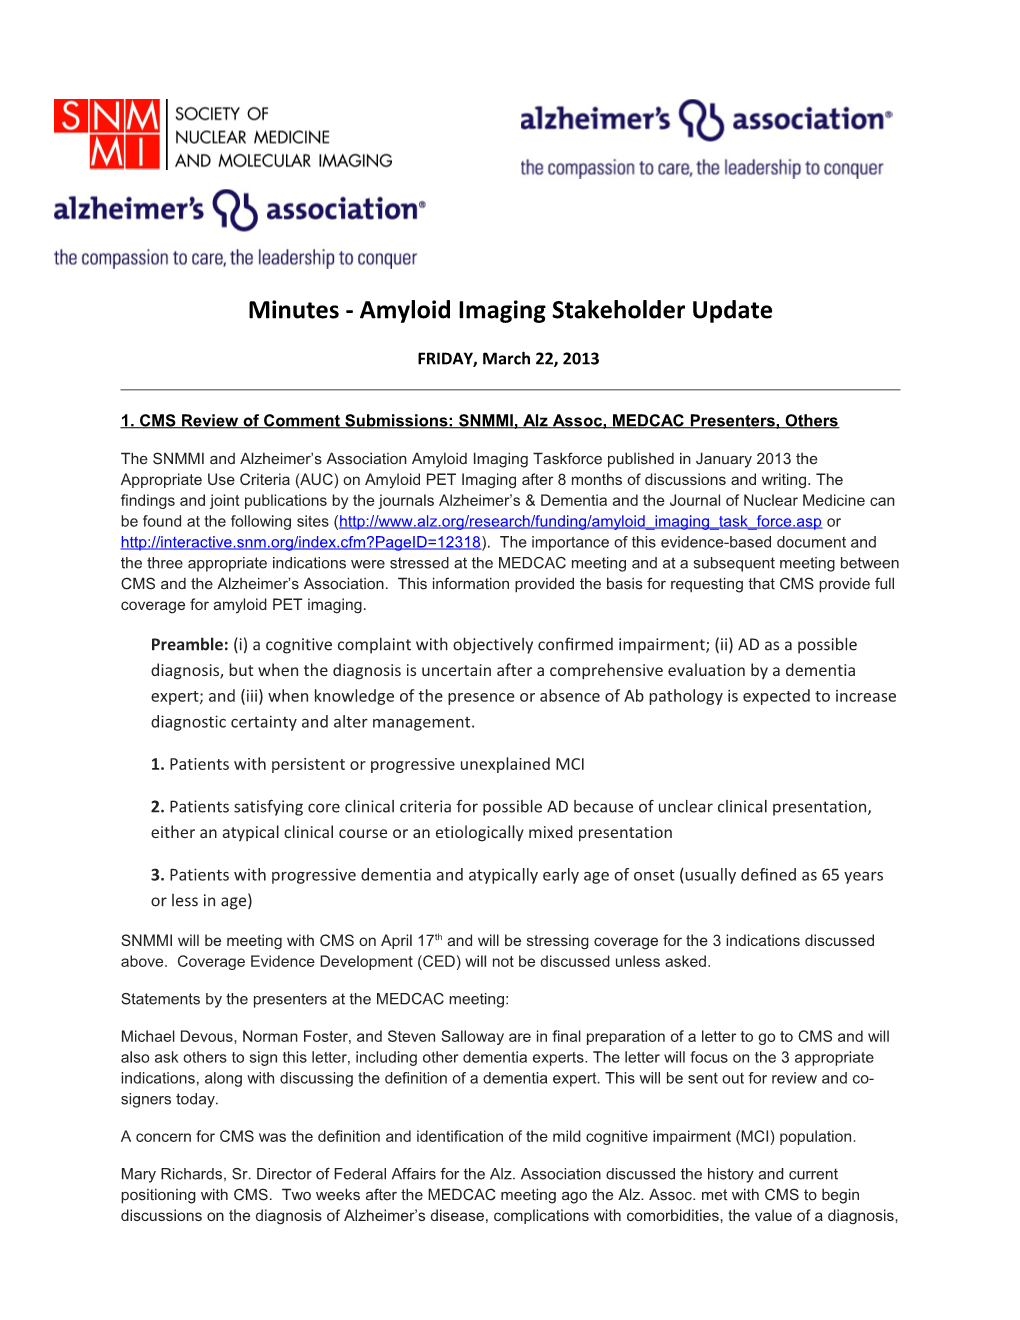 Minutes - Amyloid Imaging Stakeholder Update